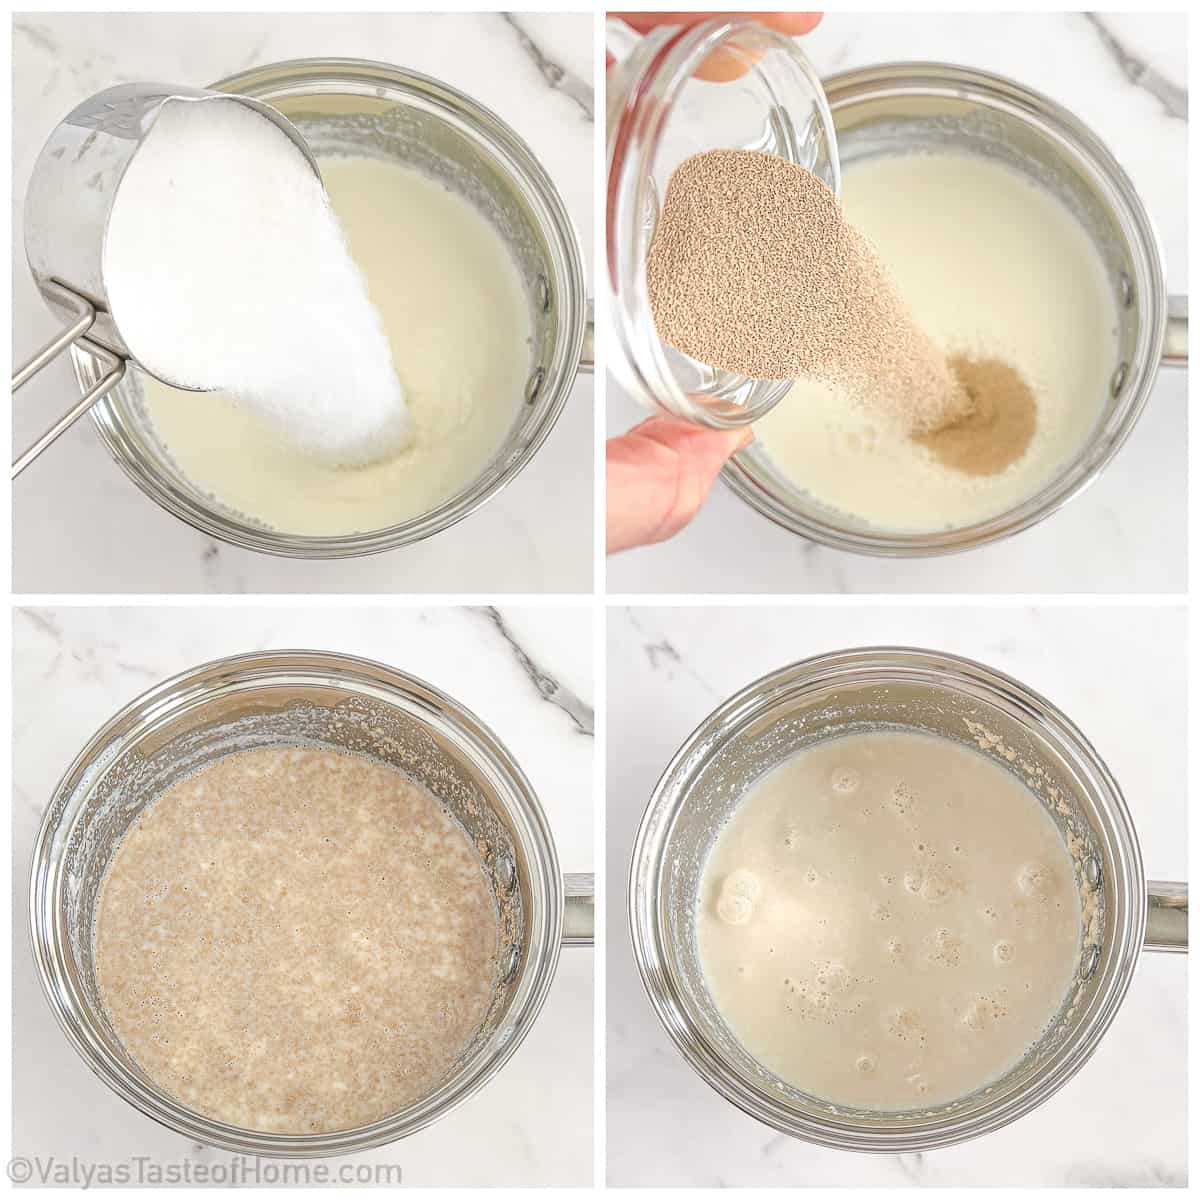 Activating yeast in sugary milk solution.